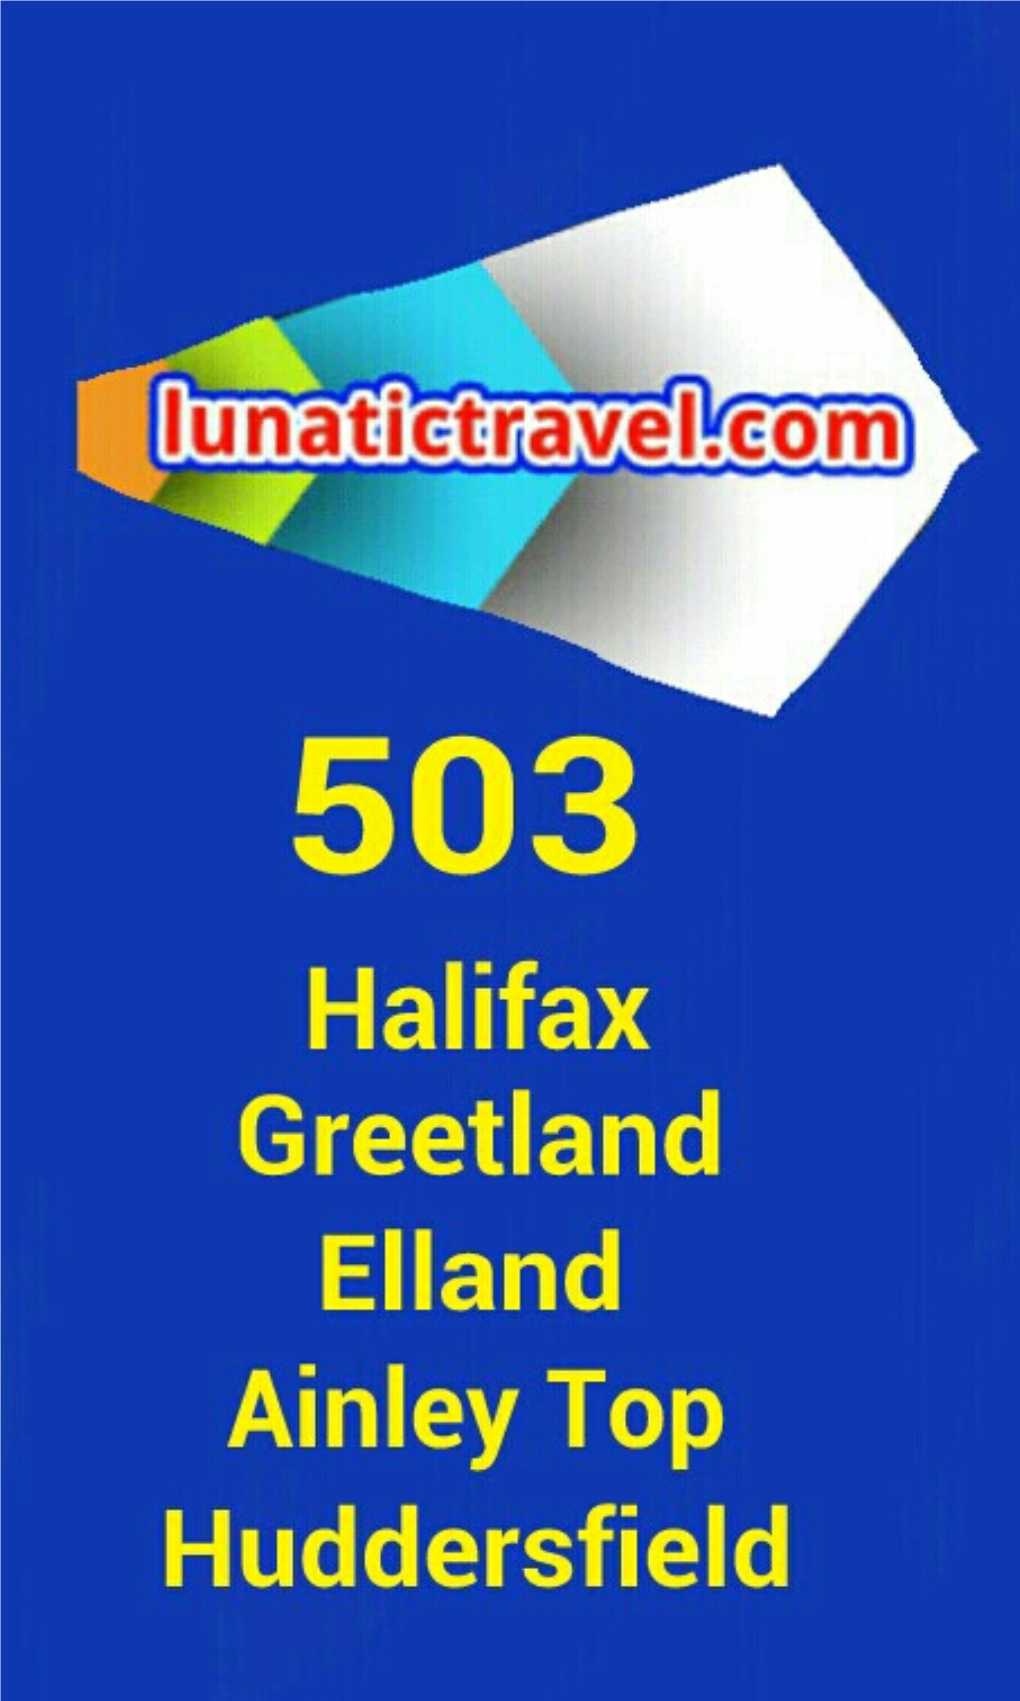 To Download the Current 503 Halifax Greetland Elland Ainley Top